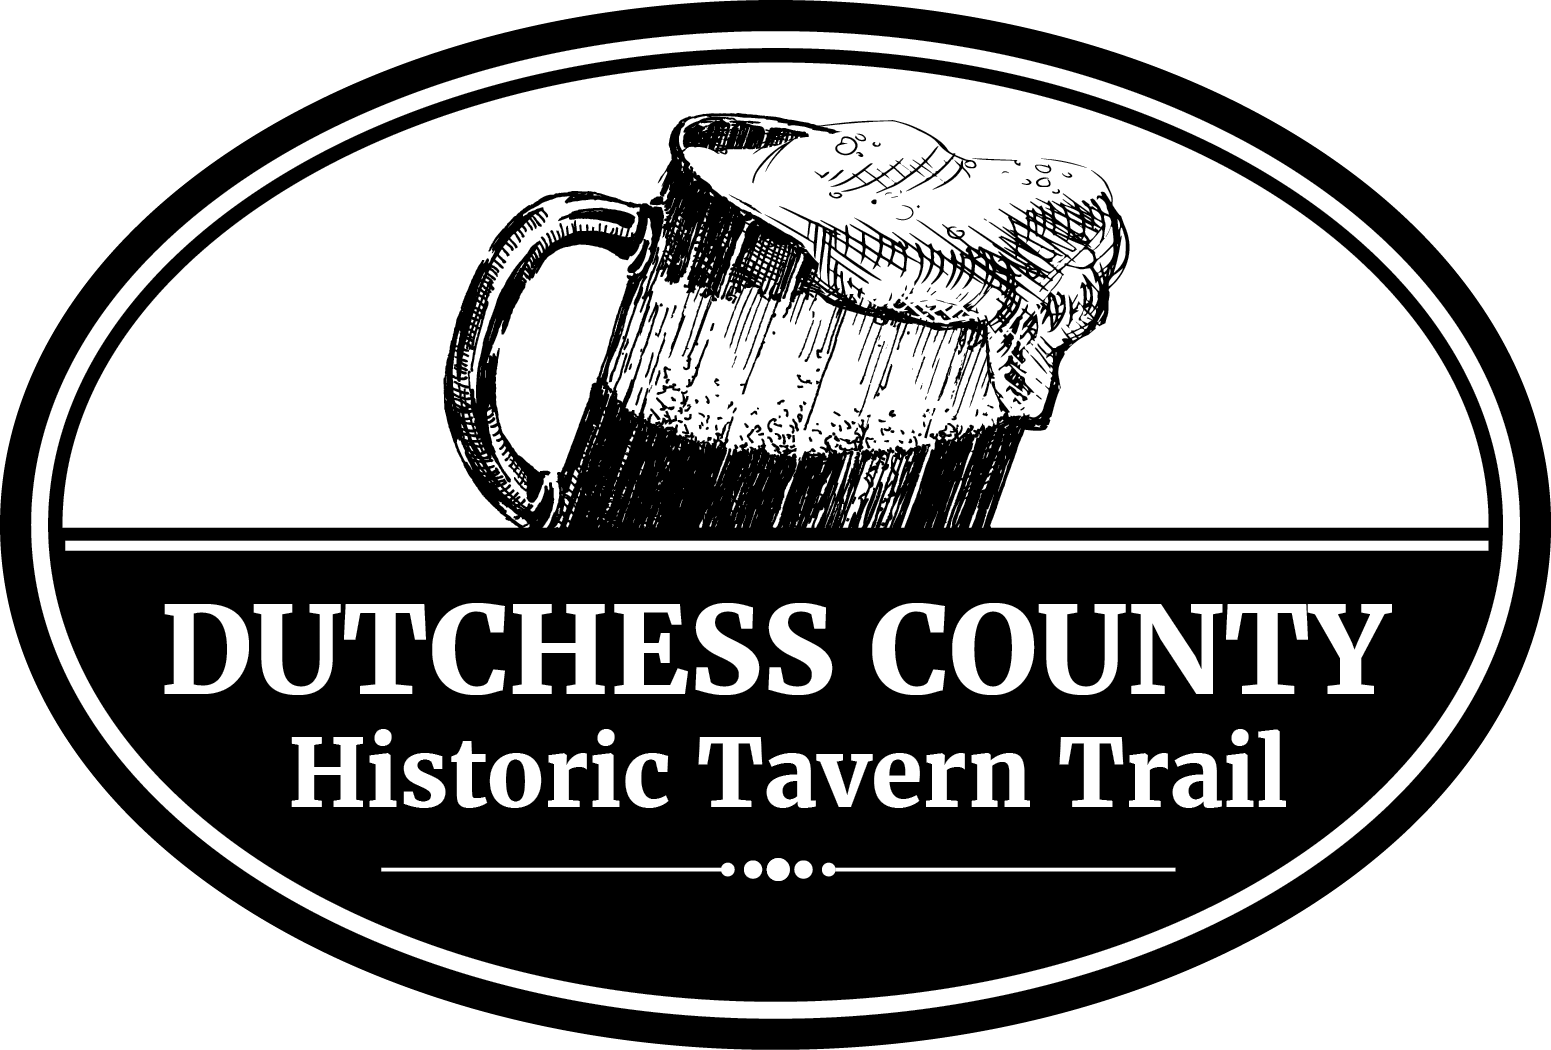 Dutchess County 2018 Historic Tavern Trail series continues this week